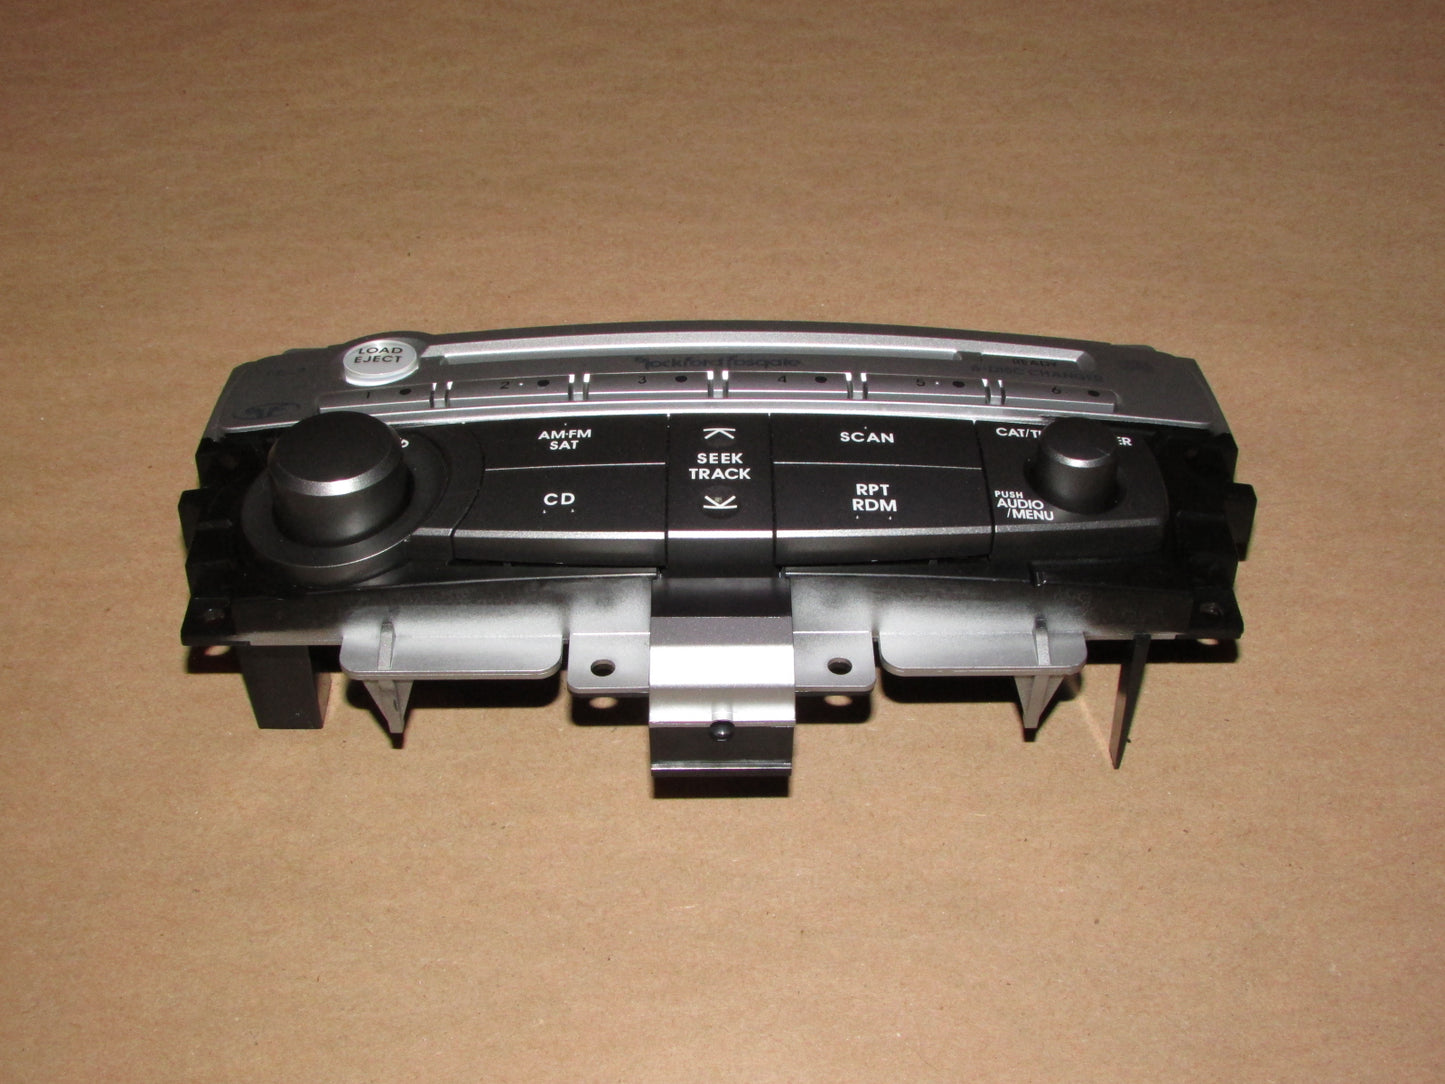 06-11 Mitsubishi Eclipse OEM Stereo Radio 6 Disc Changer Front Control Panel